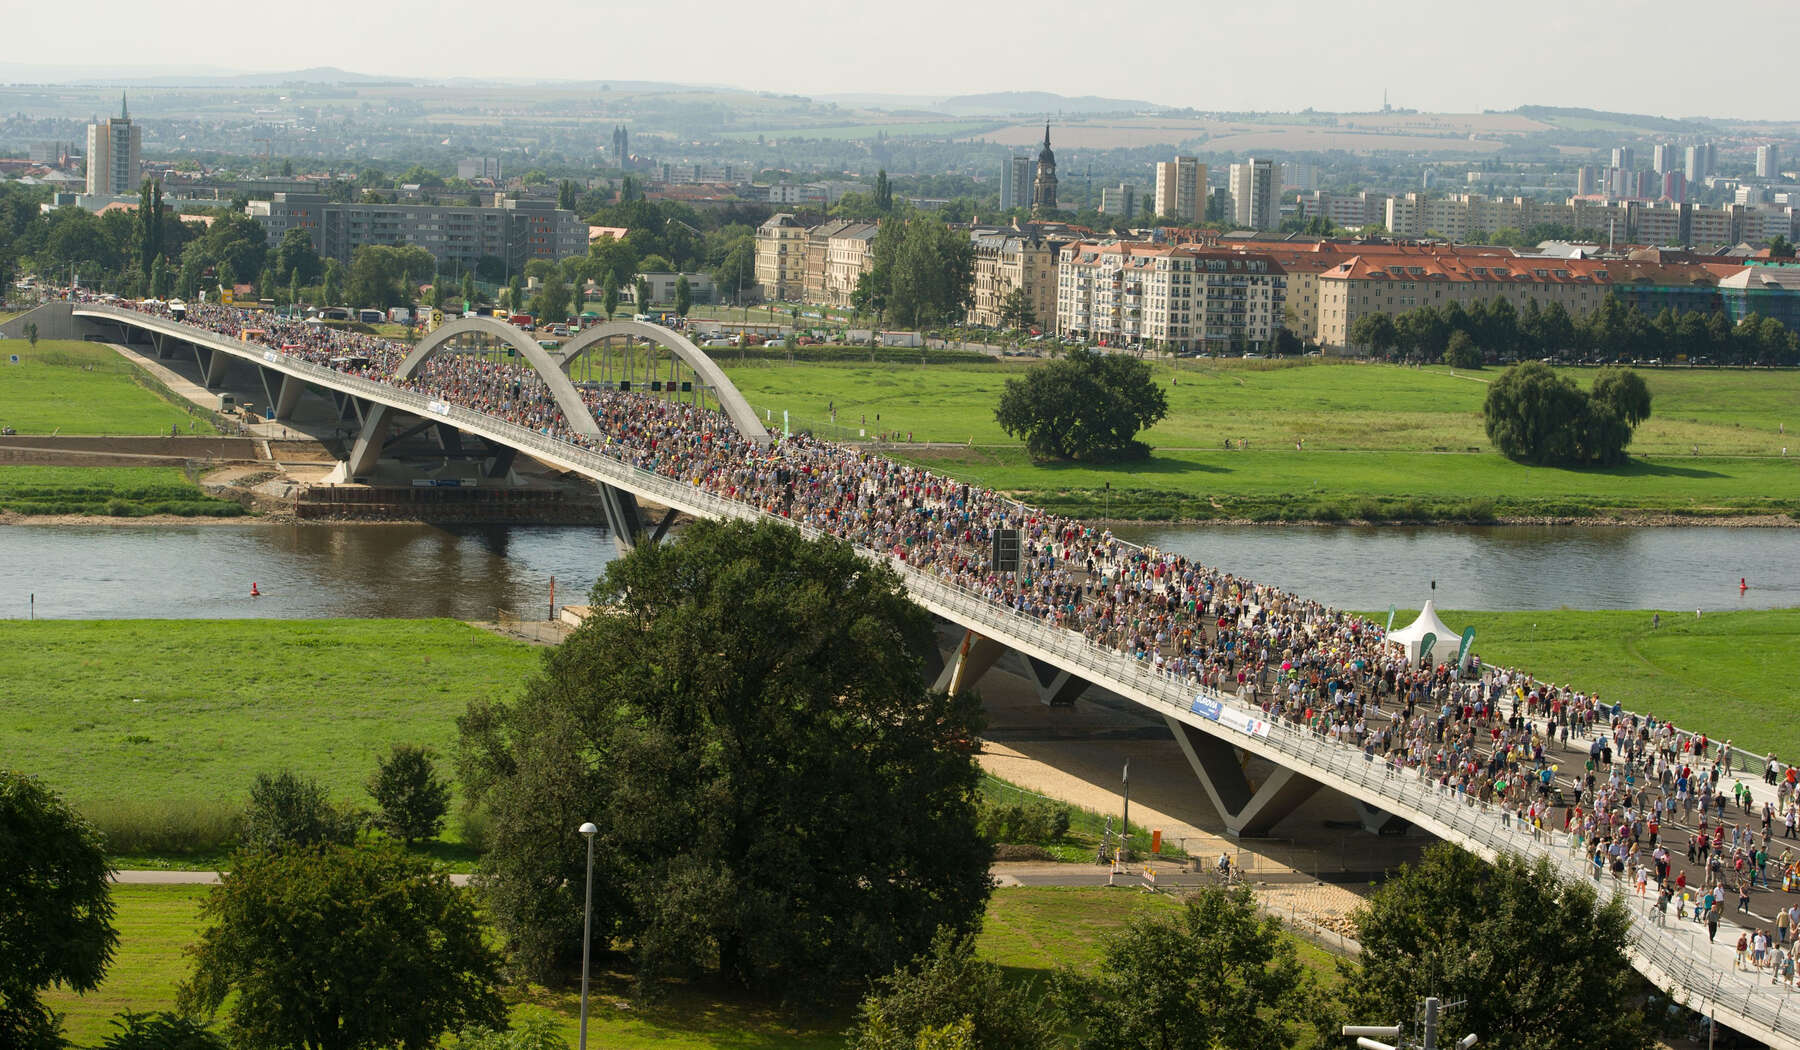 Long bridge over a river and field completely filled with crowds of people as they head toward the city in the background.